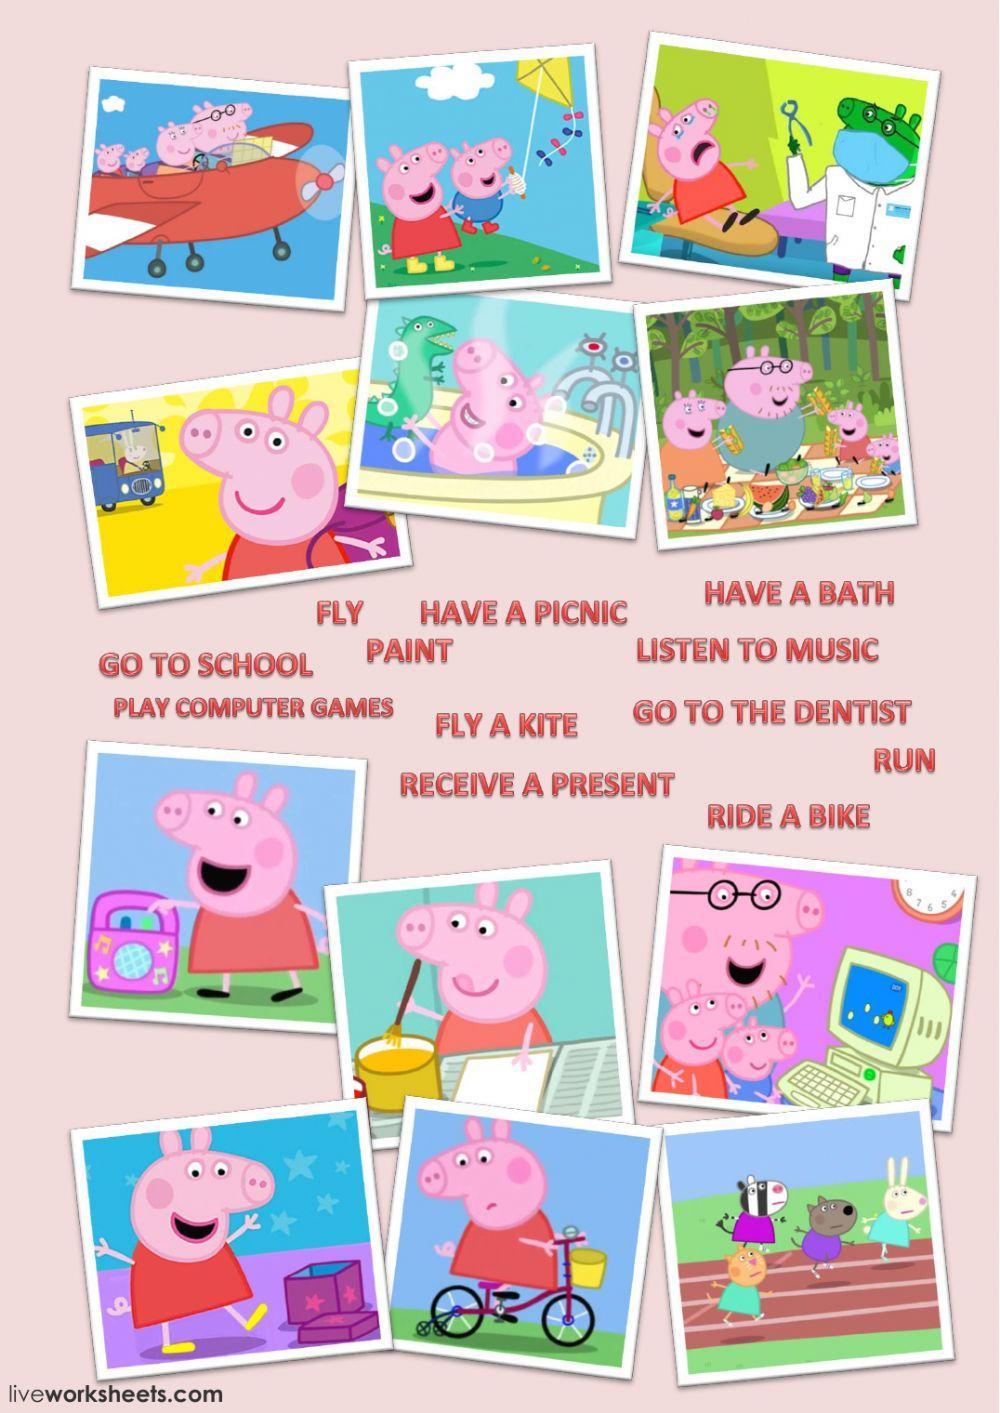 Learn YourVerbs With Peppa Pig-Match